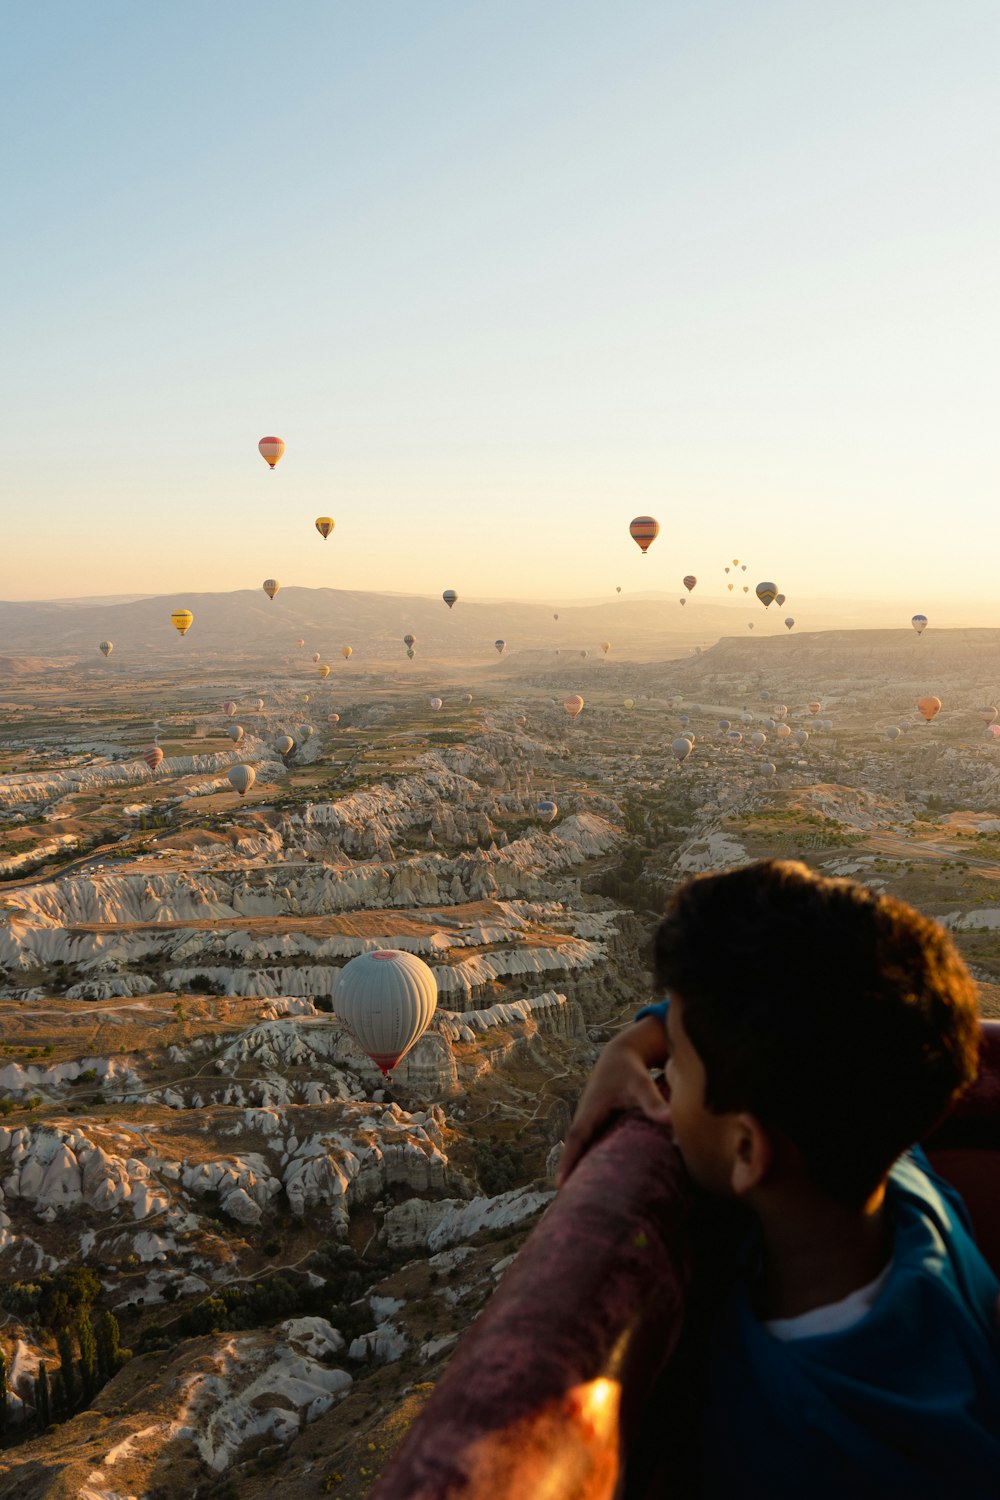 a man looking out over a valley with hot air balloons in the sky